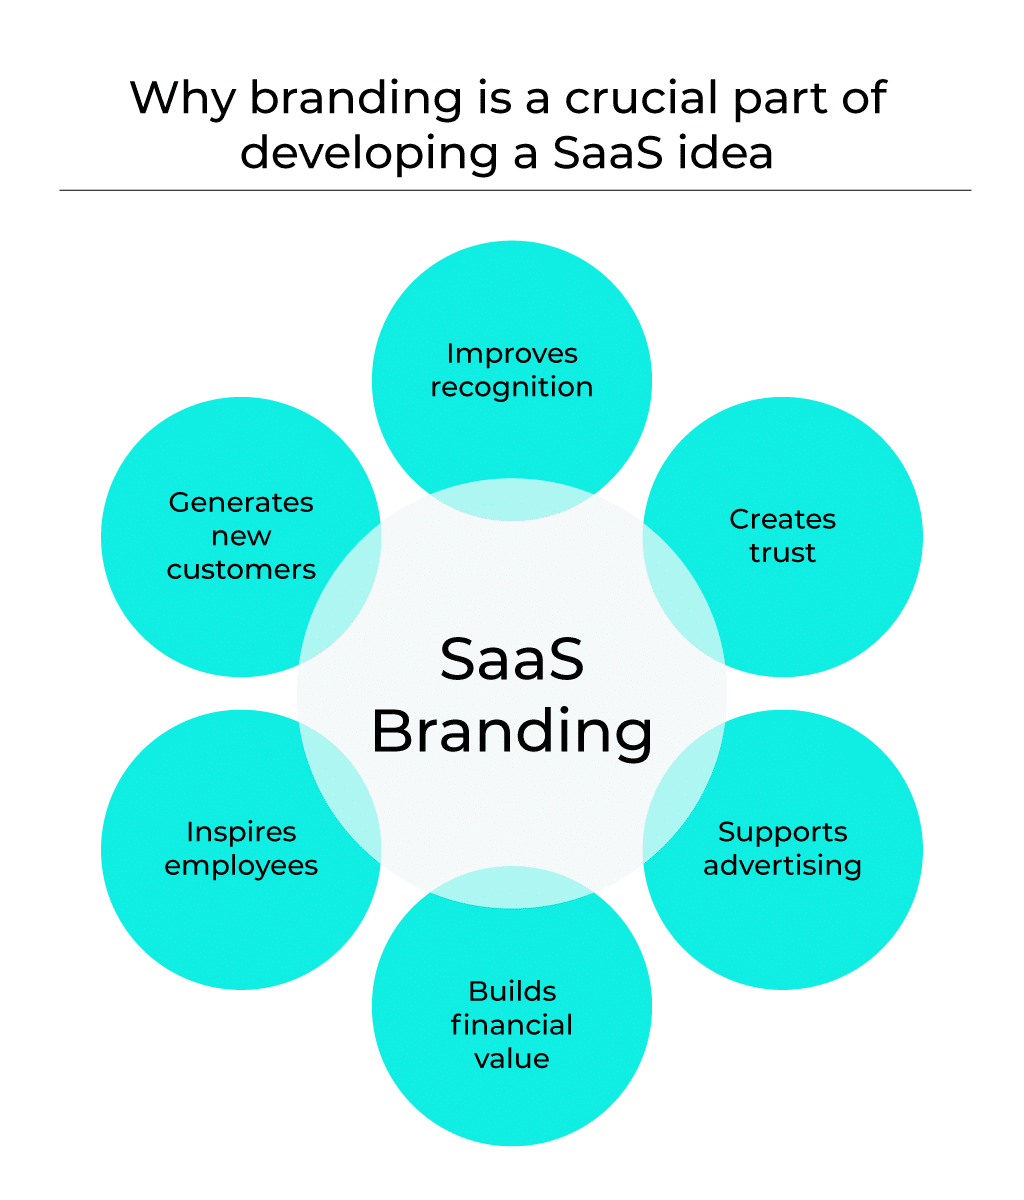 Graphic showing why branding is a crucial part of developing a SaaS idea